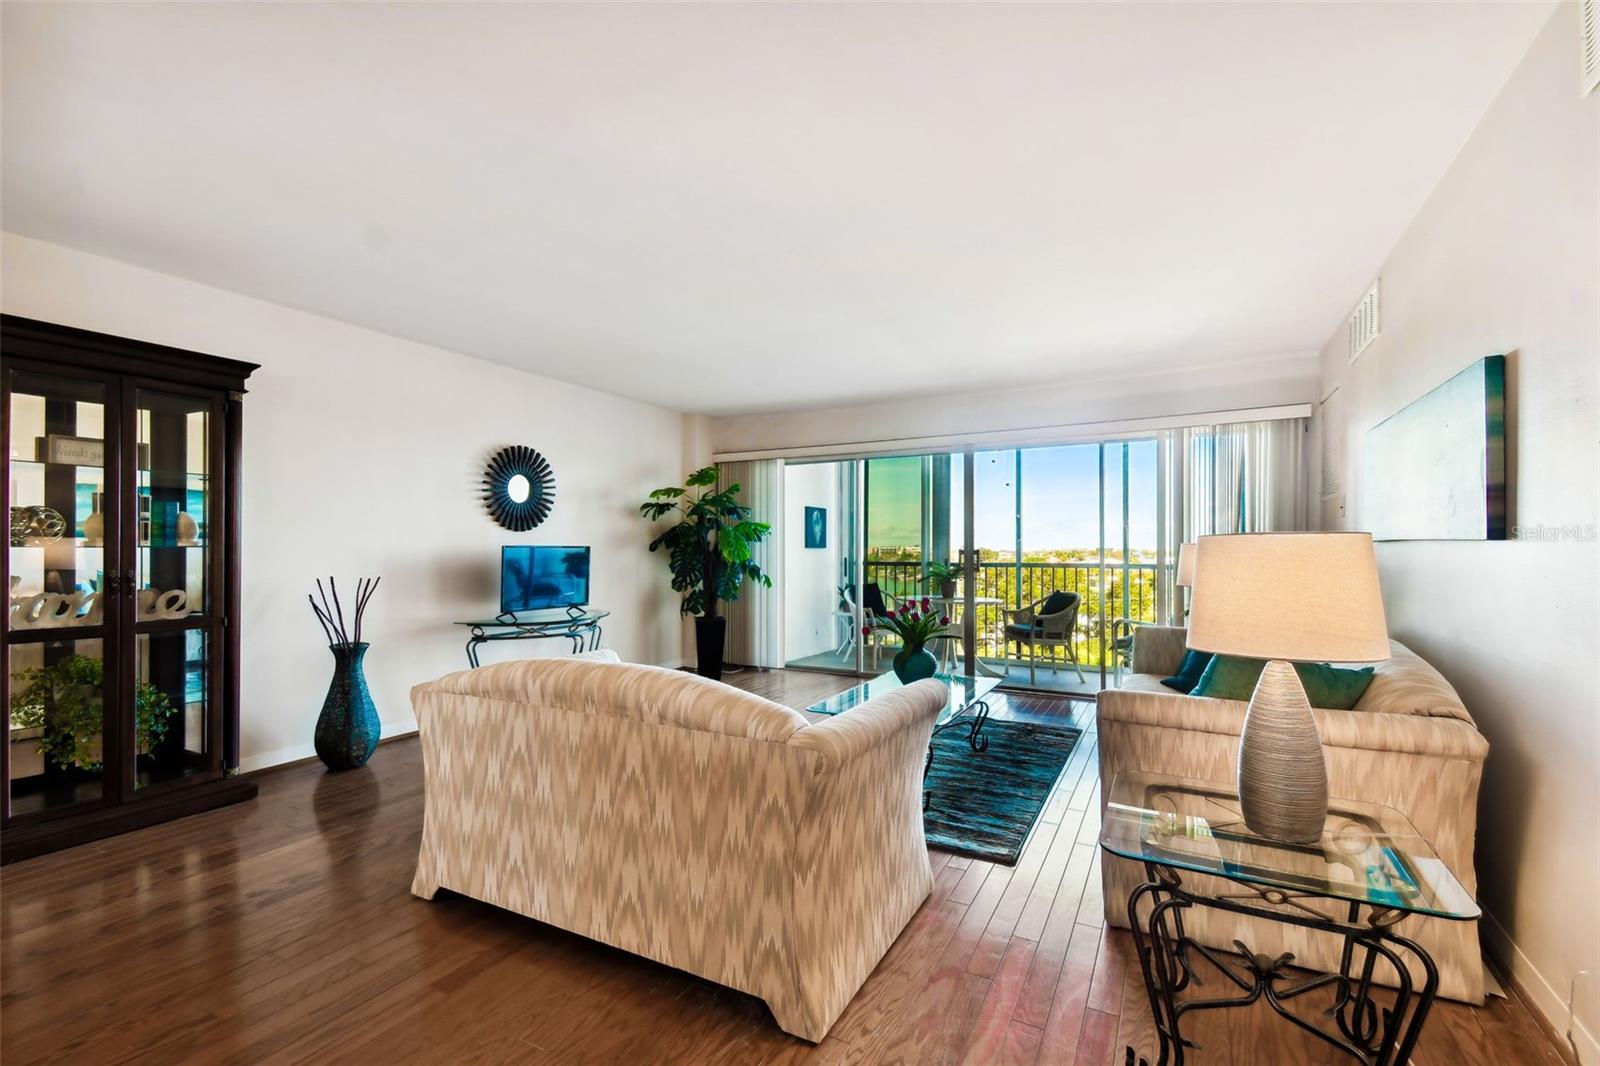 Pristine Hardwood Floors throughout most of condo!